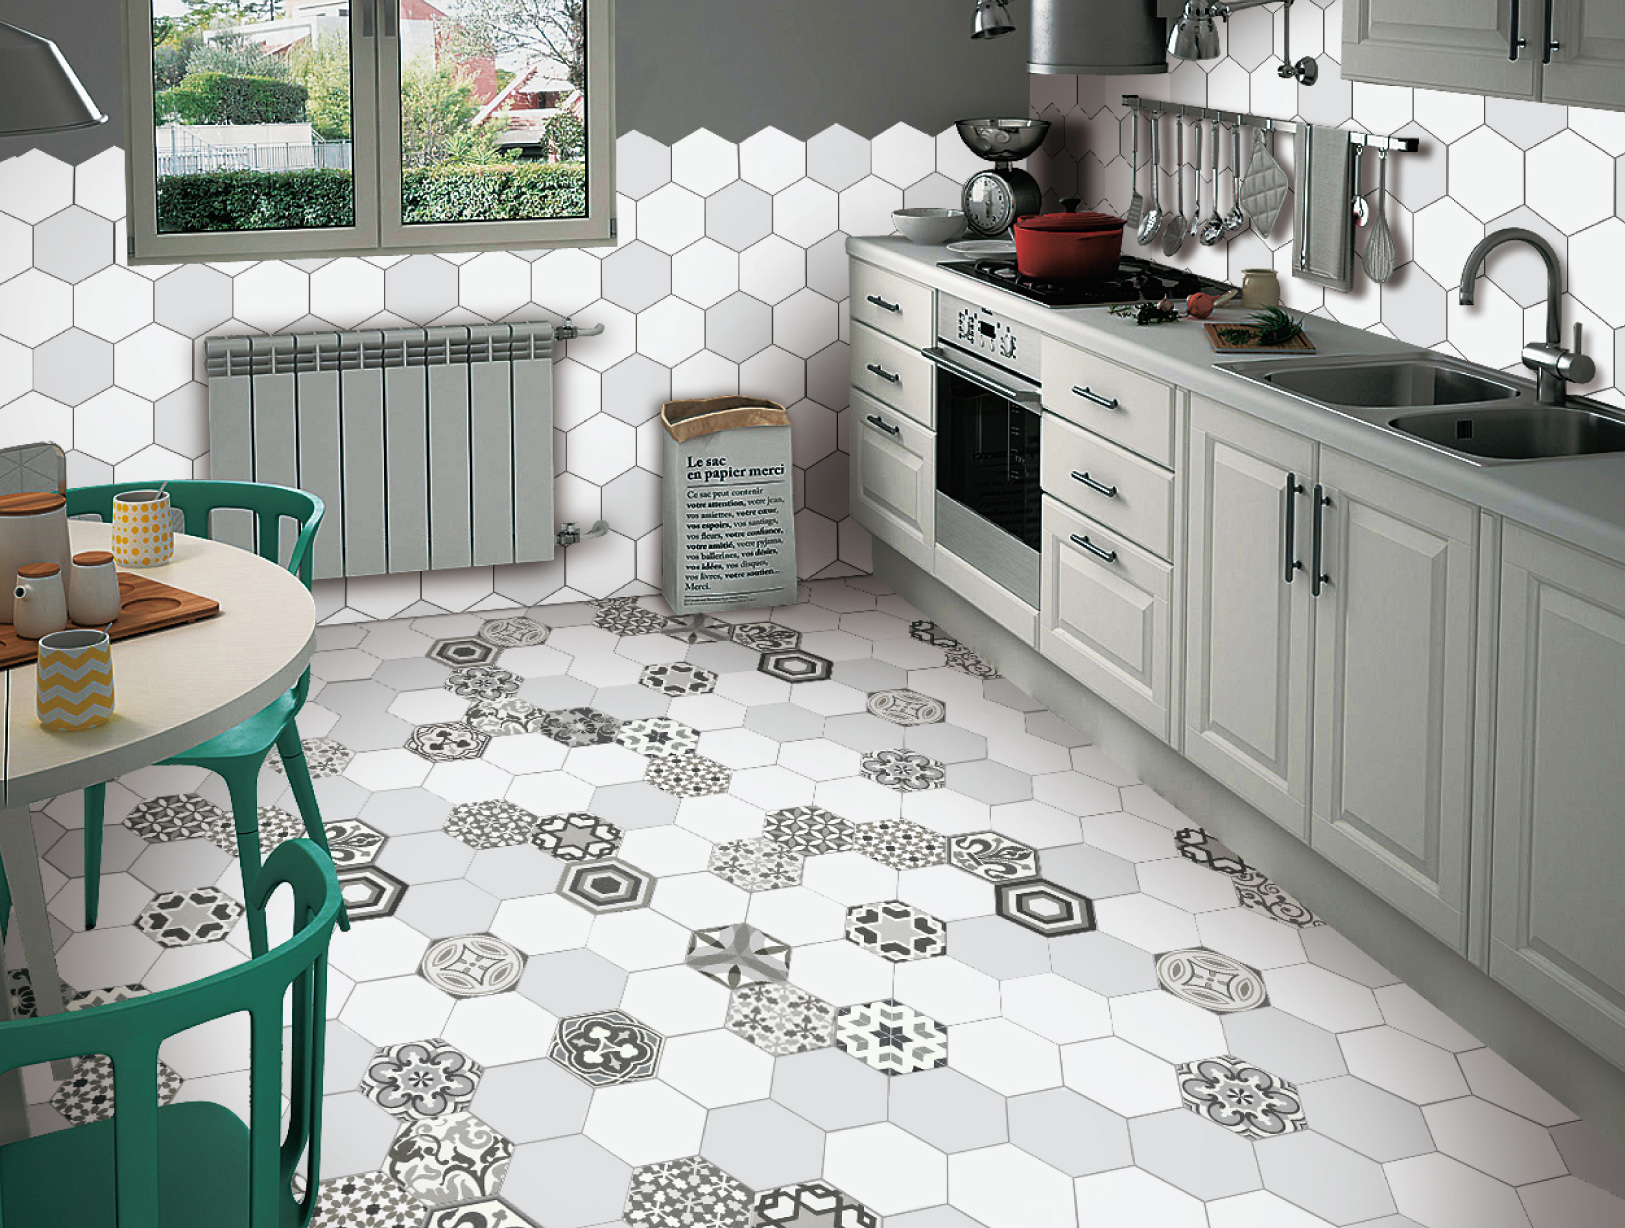 Teach You the Right Methods to Maintain Ceramic Tiles